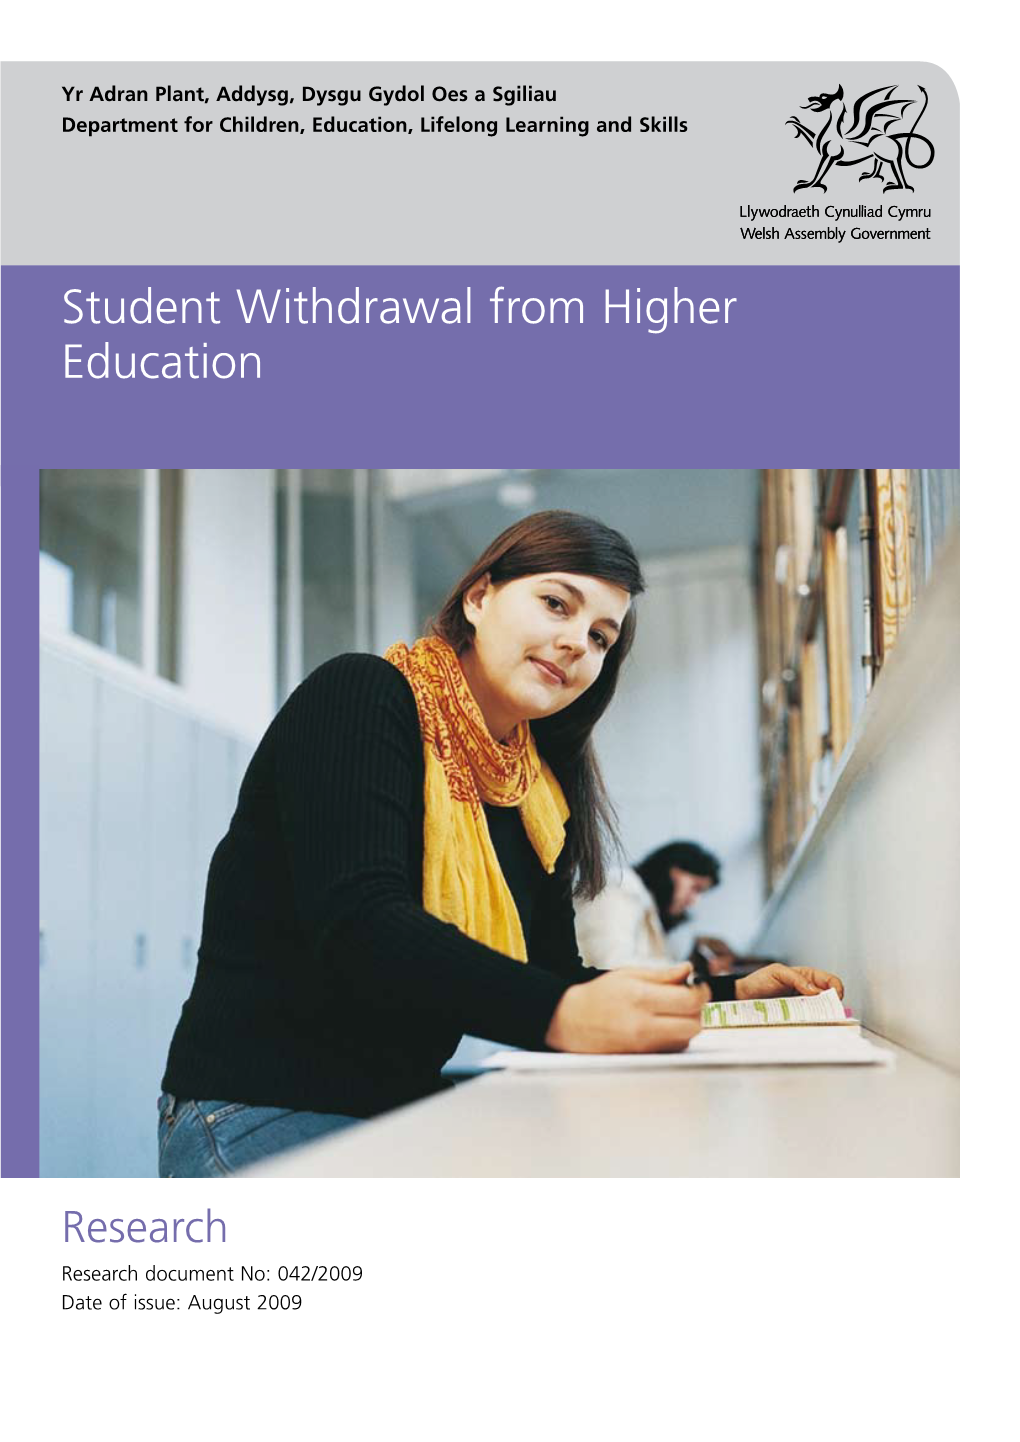 Student Withdrawal from Higher Education